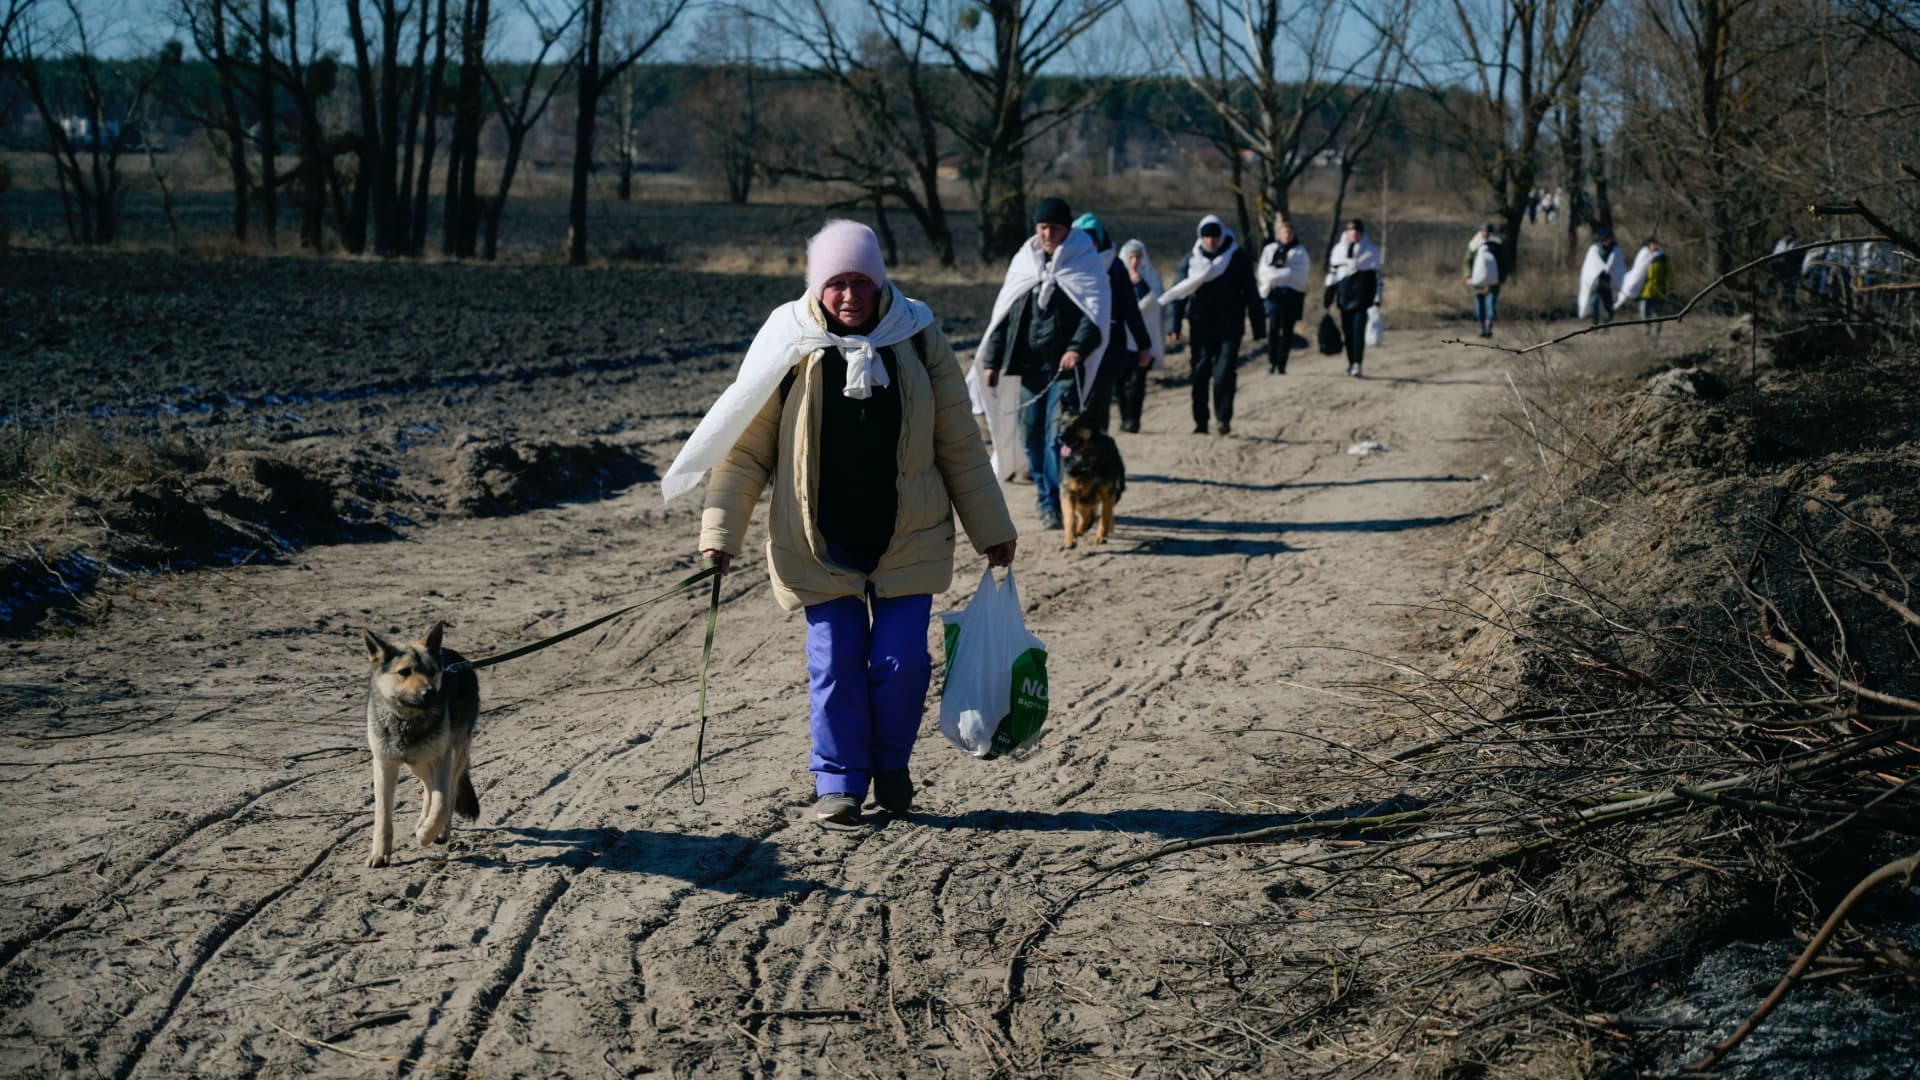 Locals from village Chervone, occupied by Russian troops, evacuate to an area controlled by Ukrainian forces, amid Russia's invasion of Ukraine, near Vyshgorod, Ukraine March 10, 2022.